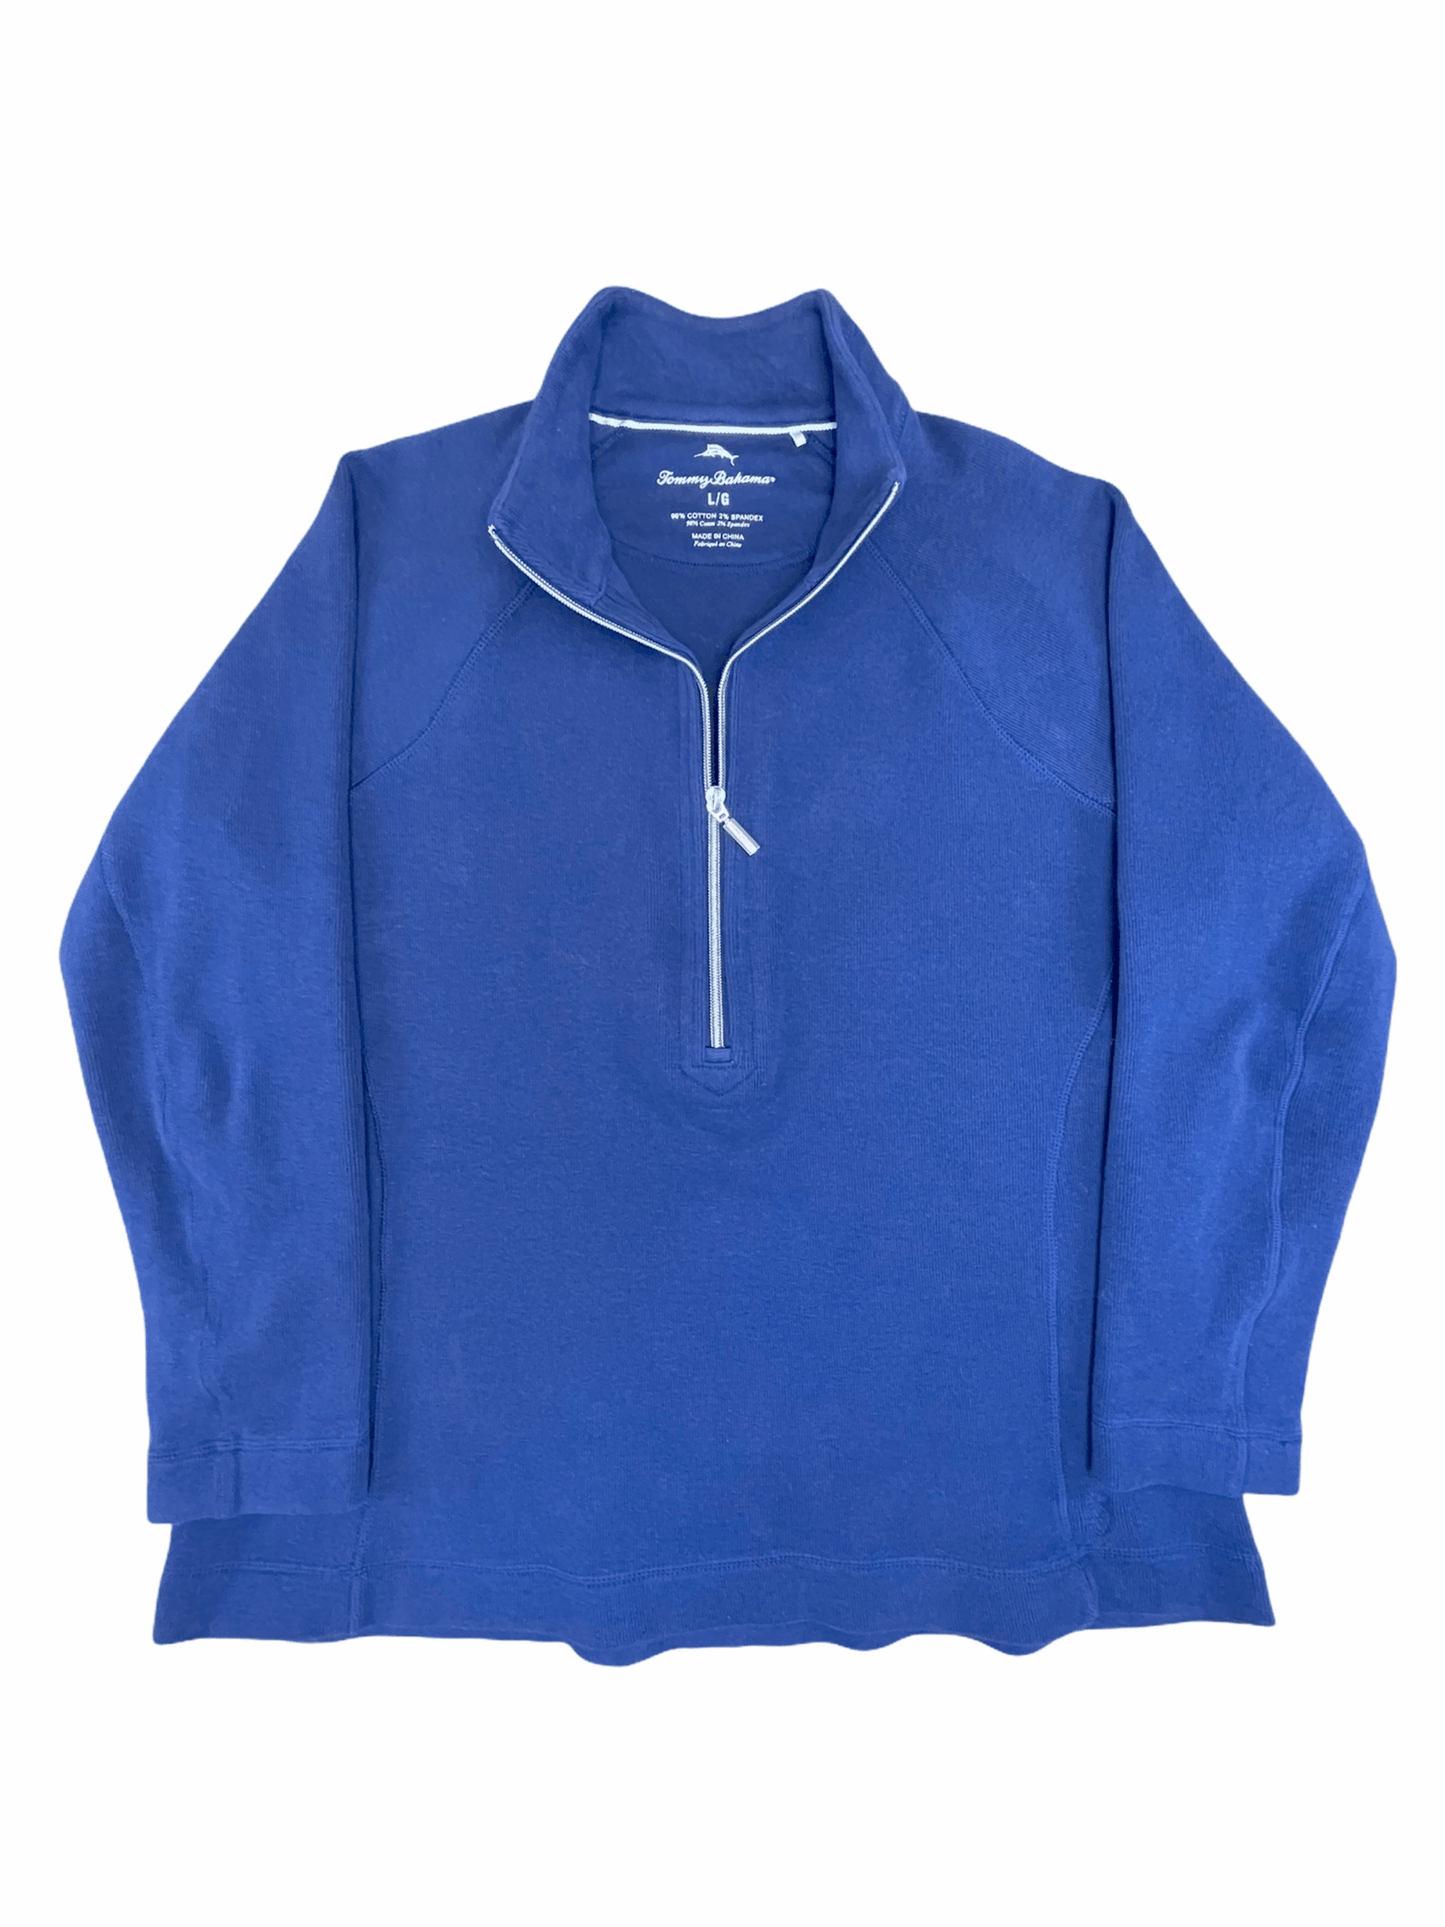 Tommy Bahama Blue 1/2 Zip Pullover Sweater Large—Genuine Design luxury consignment 